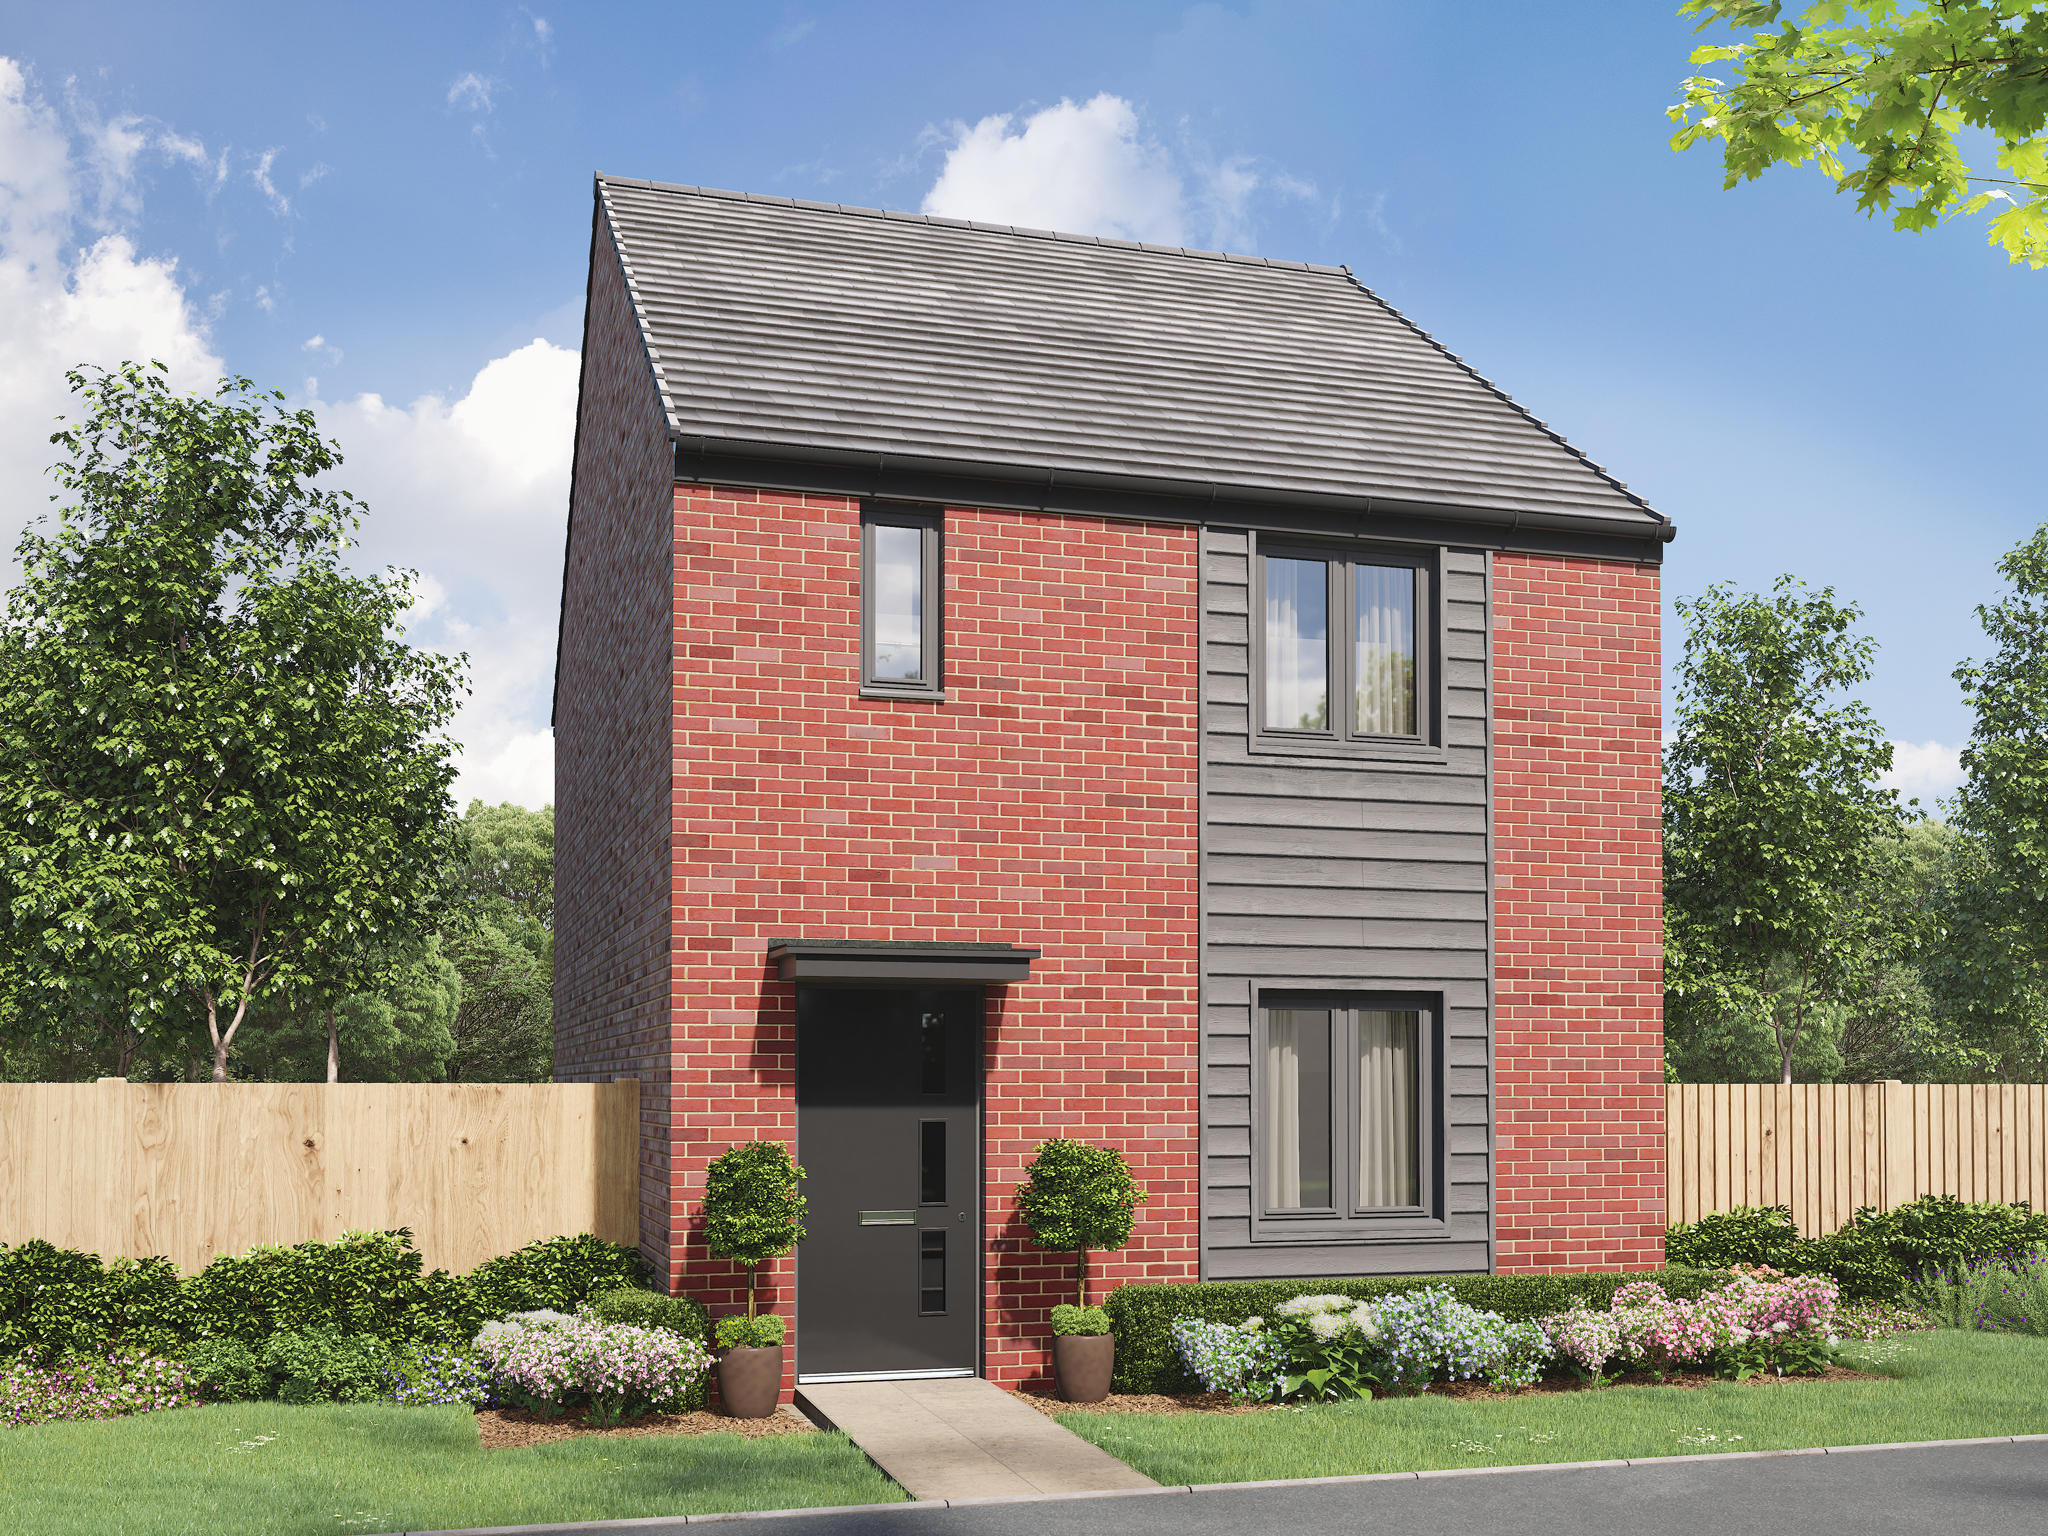 Images Persimmon Homes Lakedale at Whiteley Meadows